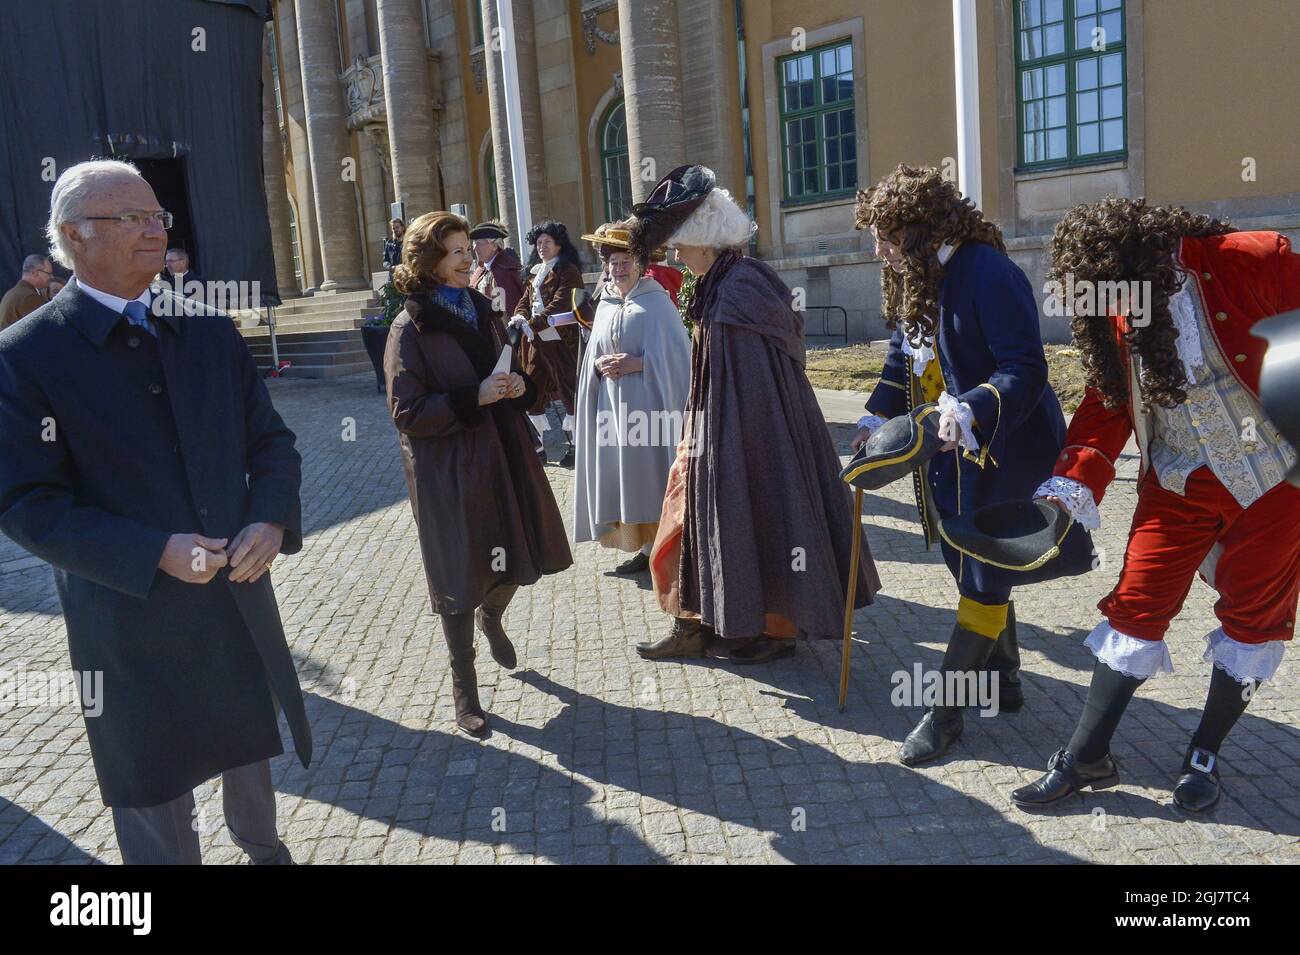 KARLSKRONA 2013-04-06 King Carl Gustaf and Queen Silvia are greeted by people in 17th century dresses at the main square in Karlskrona, Southern Sweden, on April 6, 2013. The King and Queen are touring Sweden to mark the King's 40th anniversay on the throne. Foto: Jonas EkstrÃ¶mer / SCANPIX / Kod 10030 Stock Photo